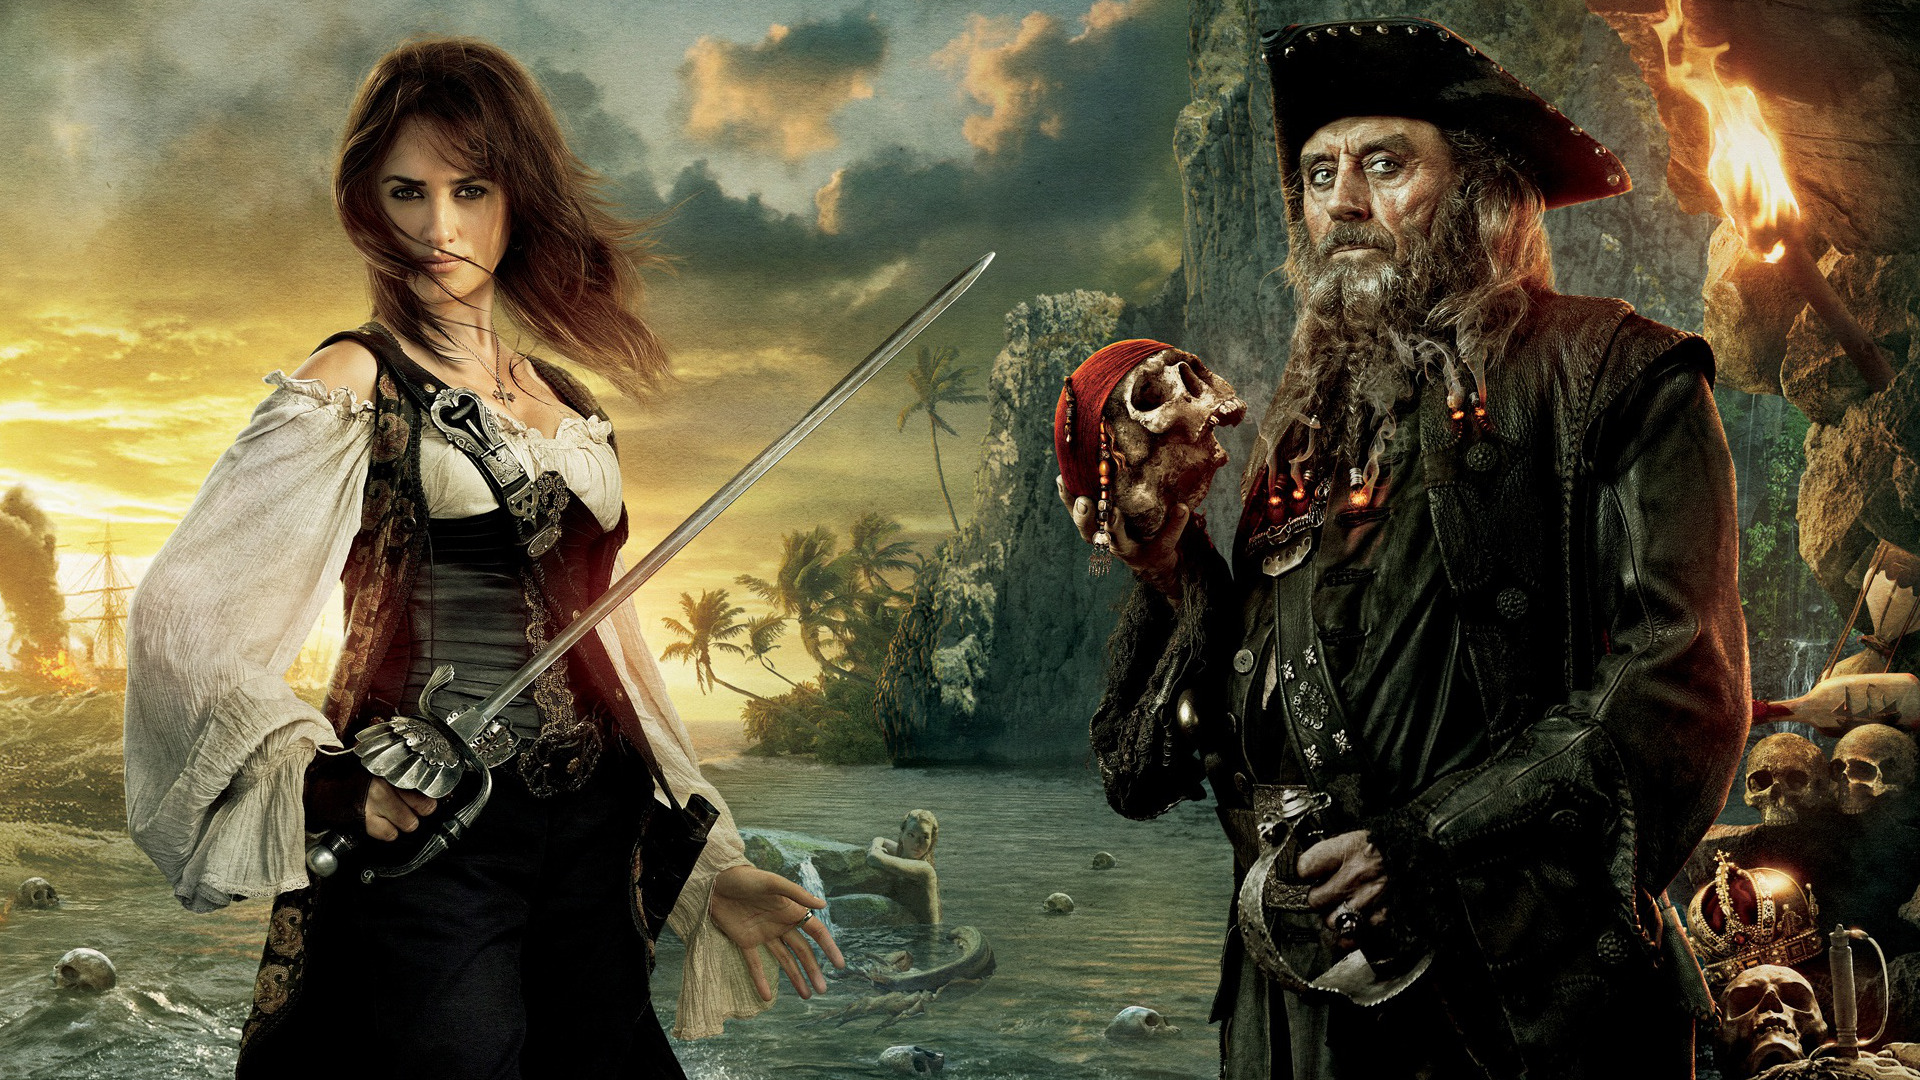 Movie Pirates of the Caribbean: On Stranger Tides HD Wallpaper | Background Image